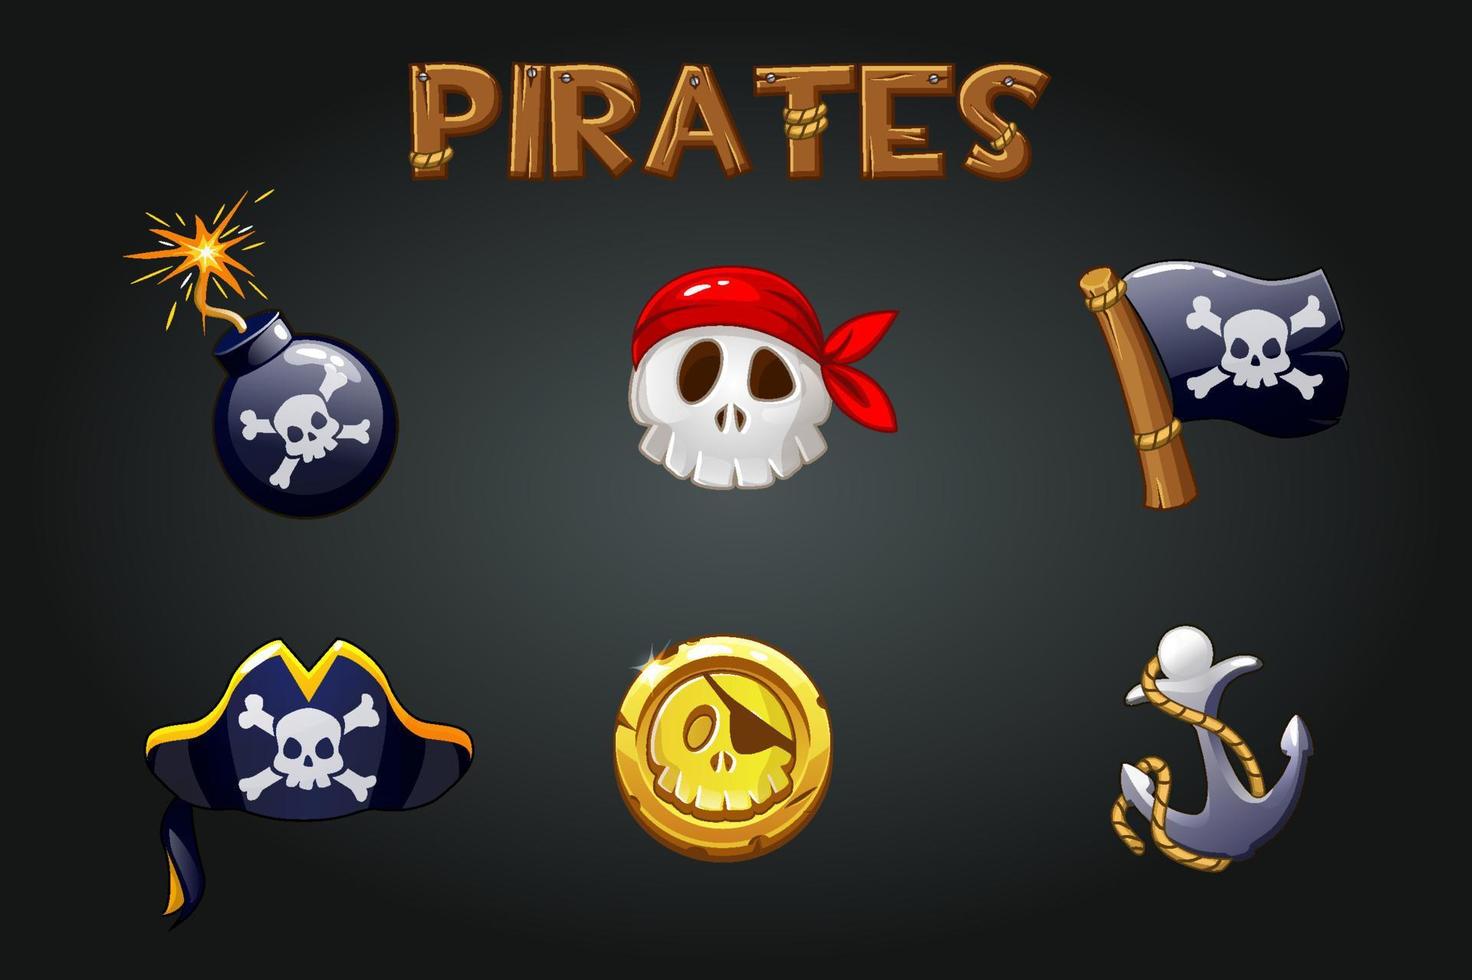 Set of pirate icons and symbols on a gray background. Bomb, anchor, skull, flag signs and wooden logo. vector